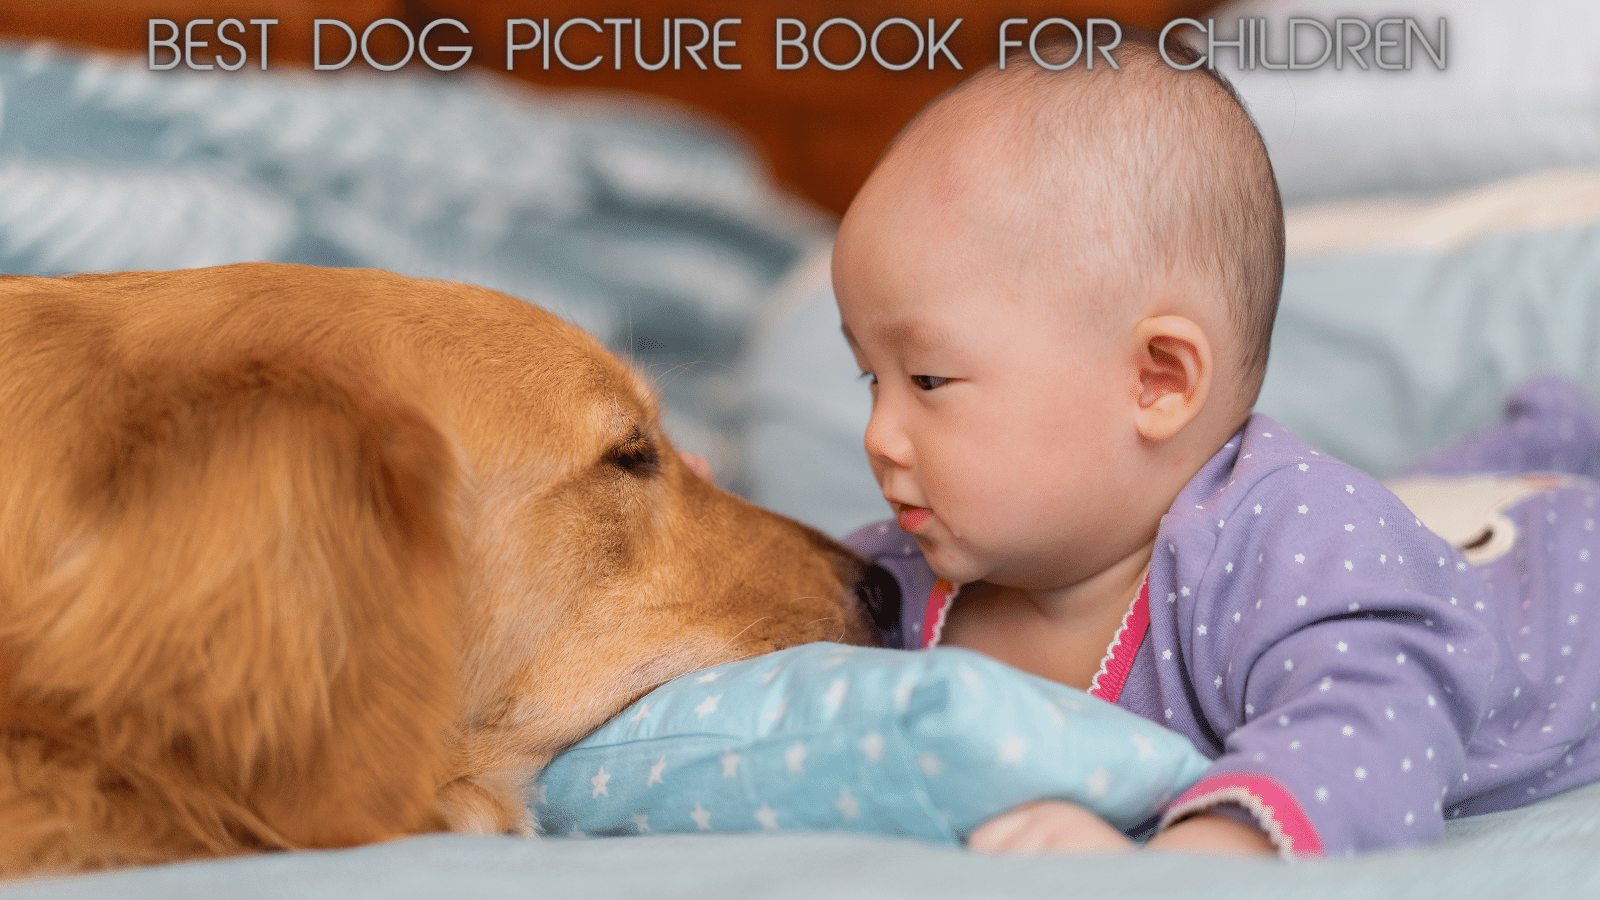 Cover photo for dog picture book